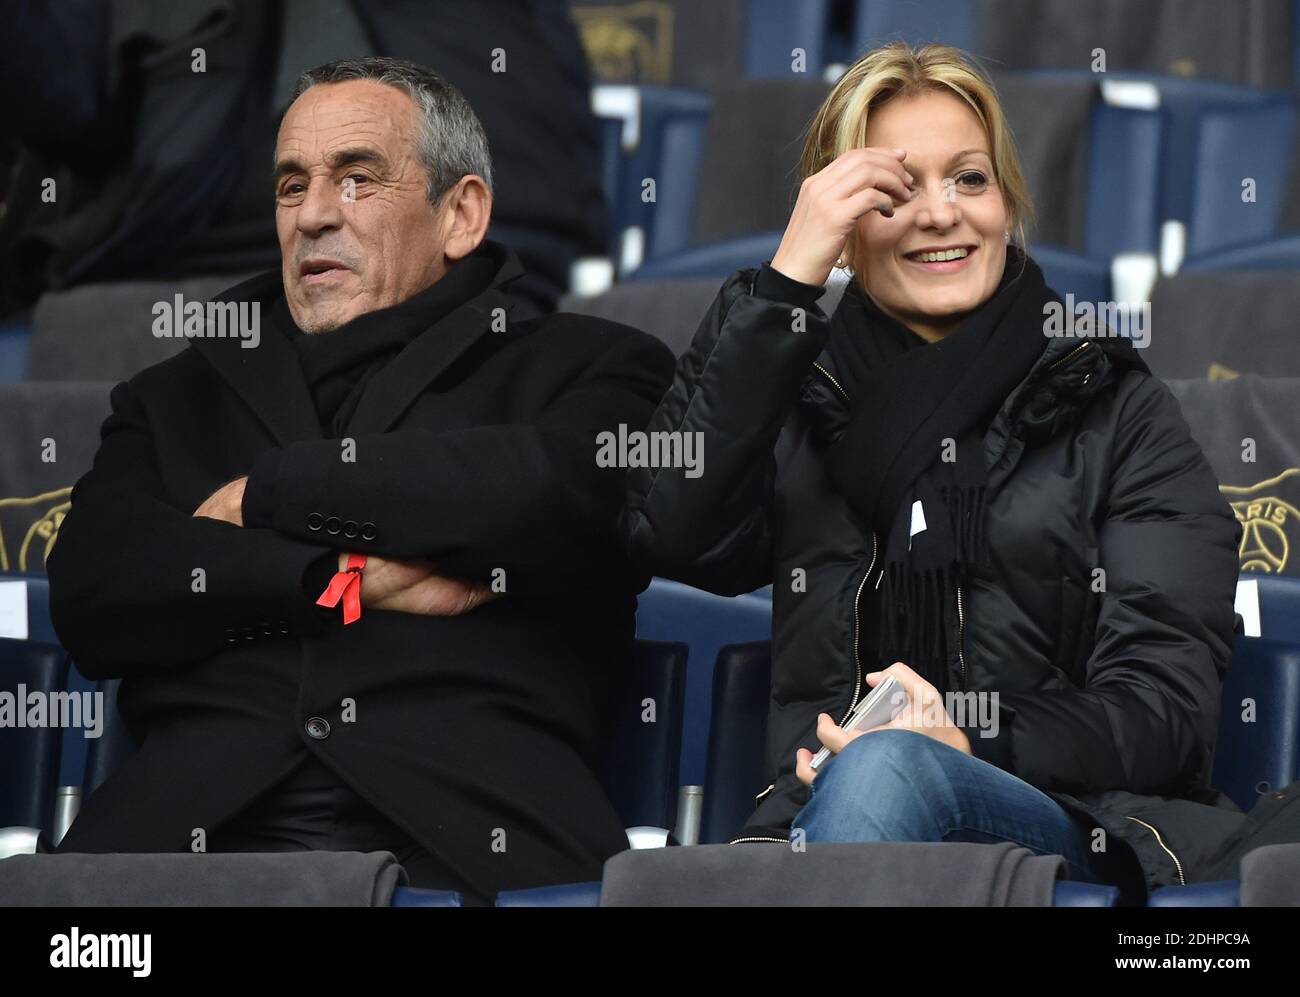 Thierry Ardisson and his wife Audrey Crespo-Mara attending the French First League (L1) football match between Paris Saint-Germain (PSG) and Reims at the Parc des Princes stadium in Paris, France on February 20, 2016. PSG won 4-1. Photo by Christian Liewig/ABACAPRESS.COM Stock Photo